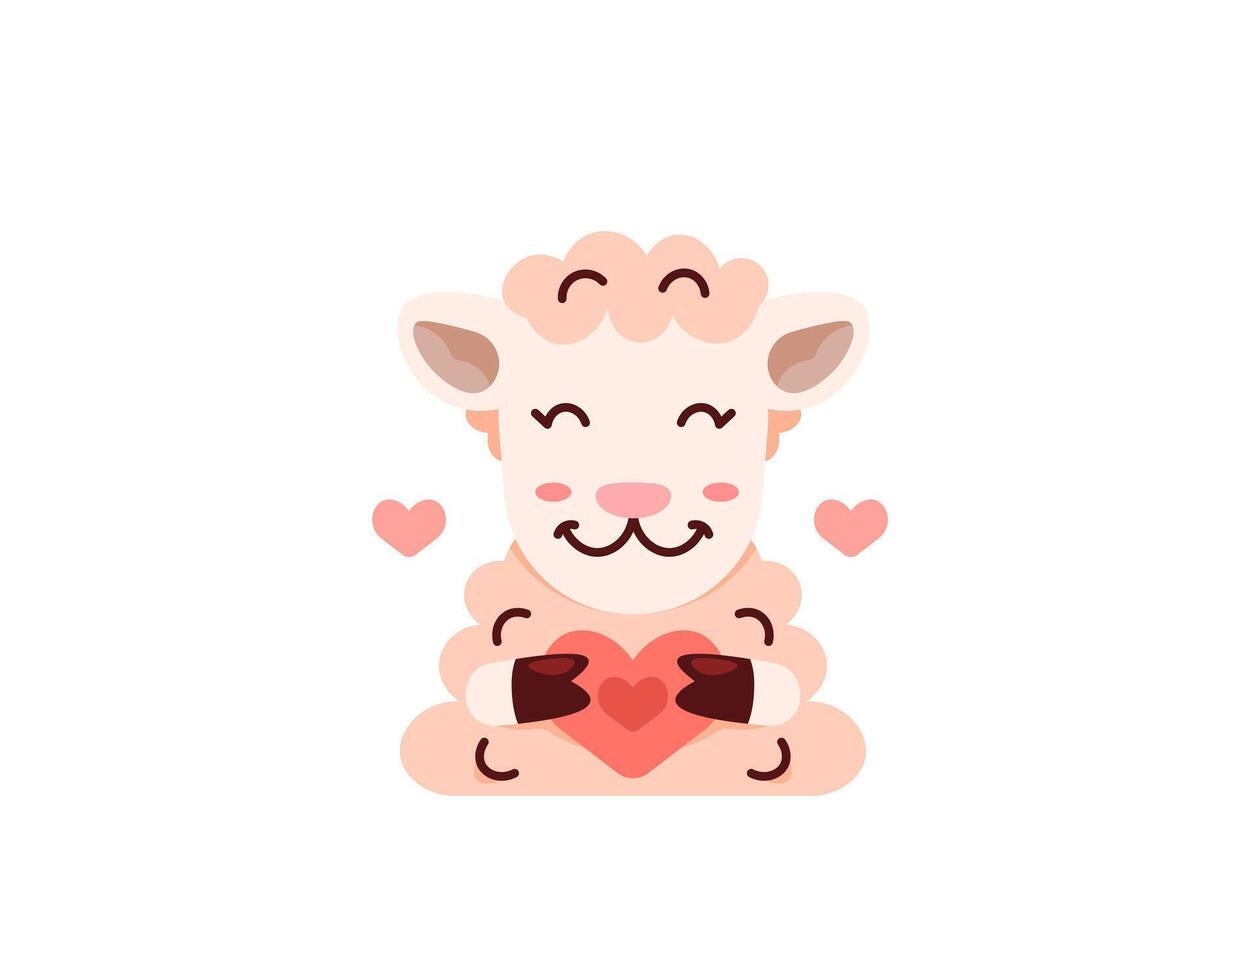 An illustration of a cute sheep holding a heart or a symbol of love. funny, cute, and adorable Goat character. animals and love. graphic elements of Valentine's Day. Illustration design for poster, vector